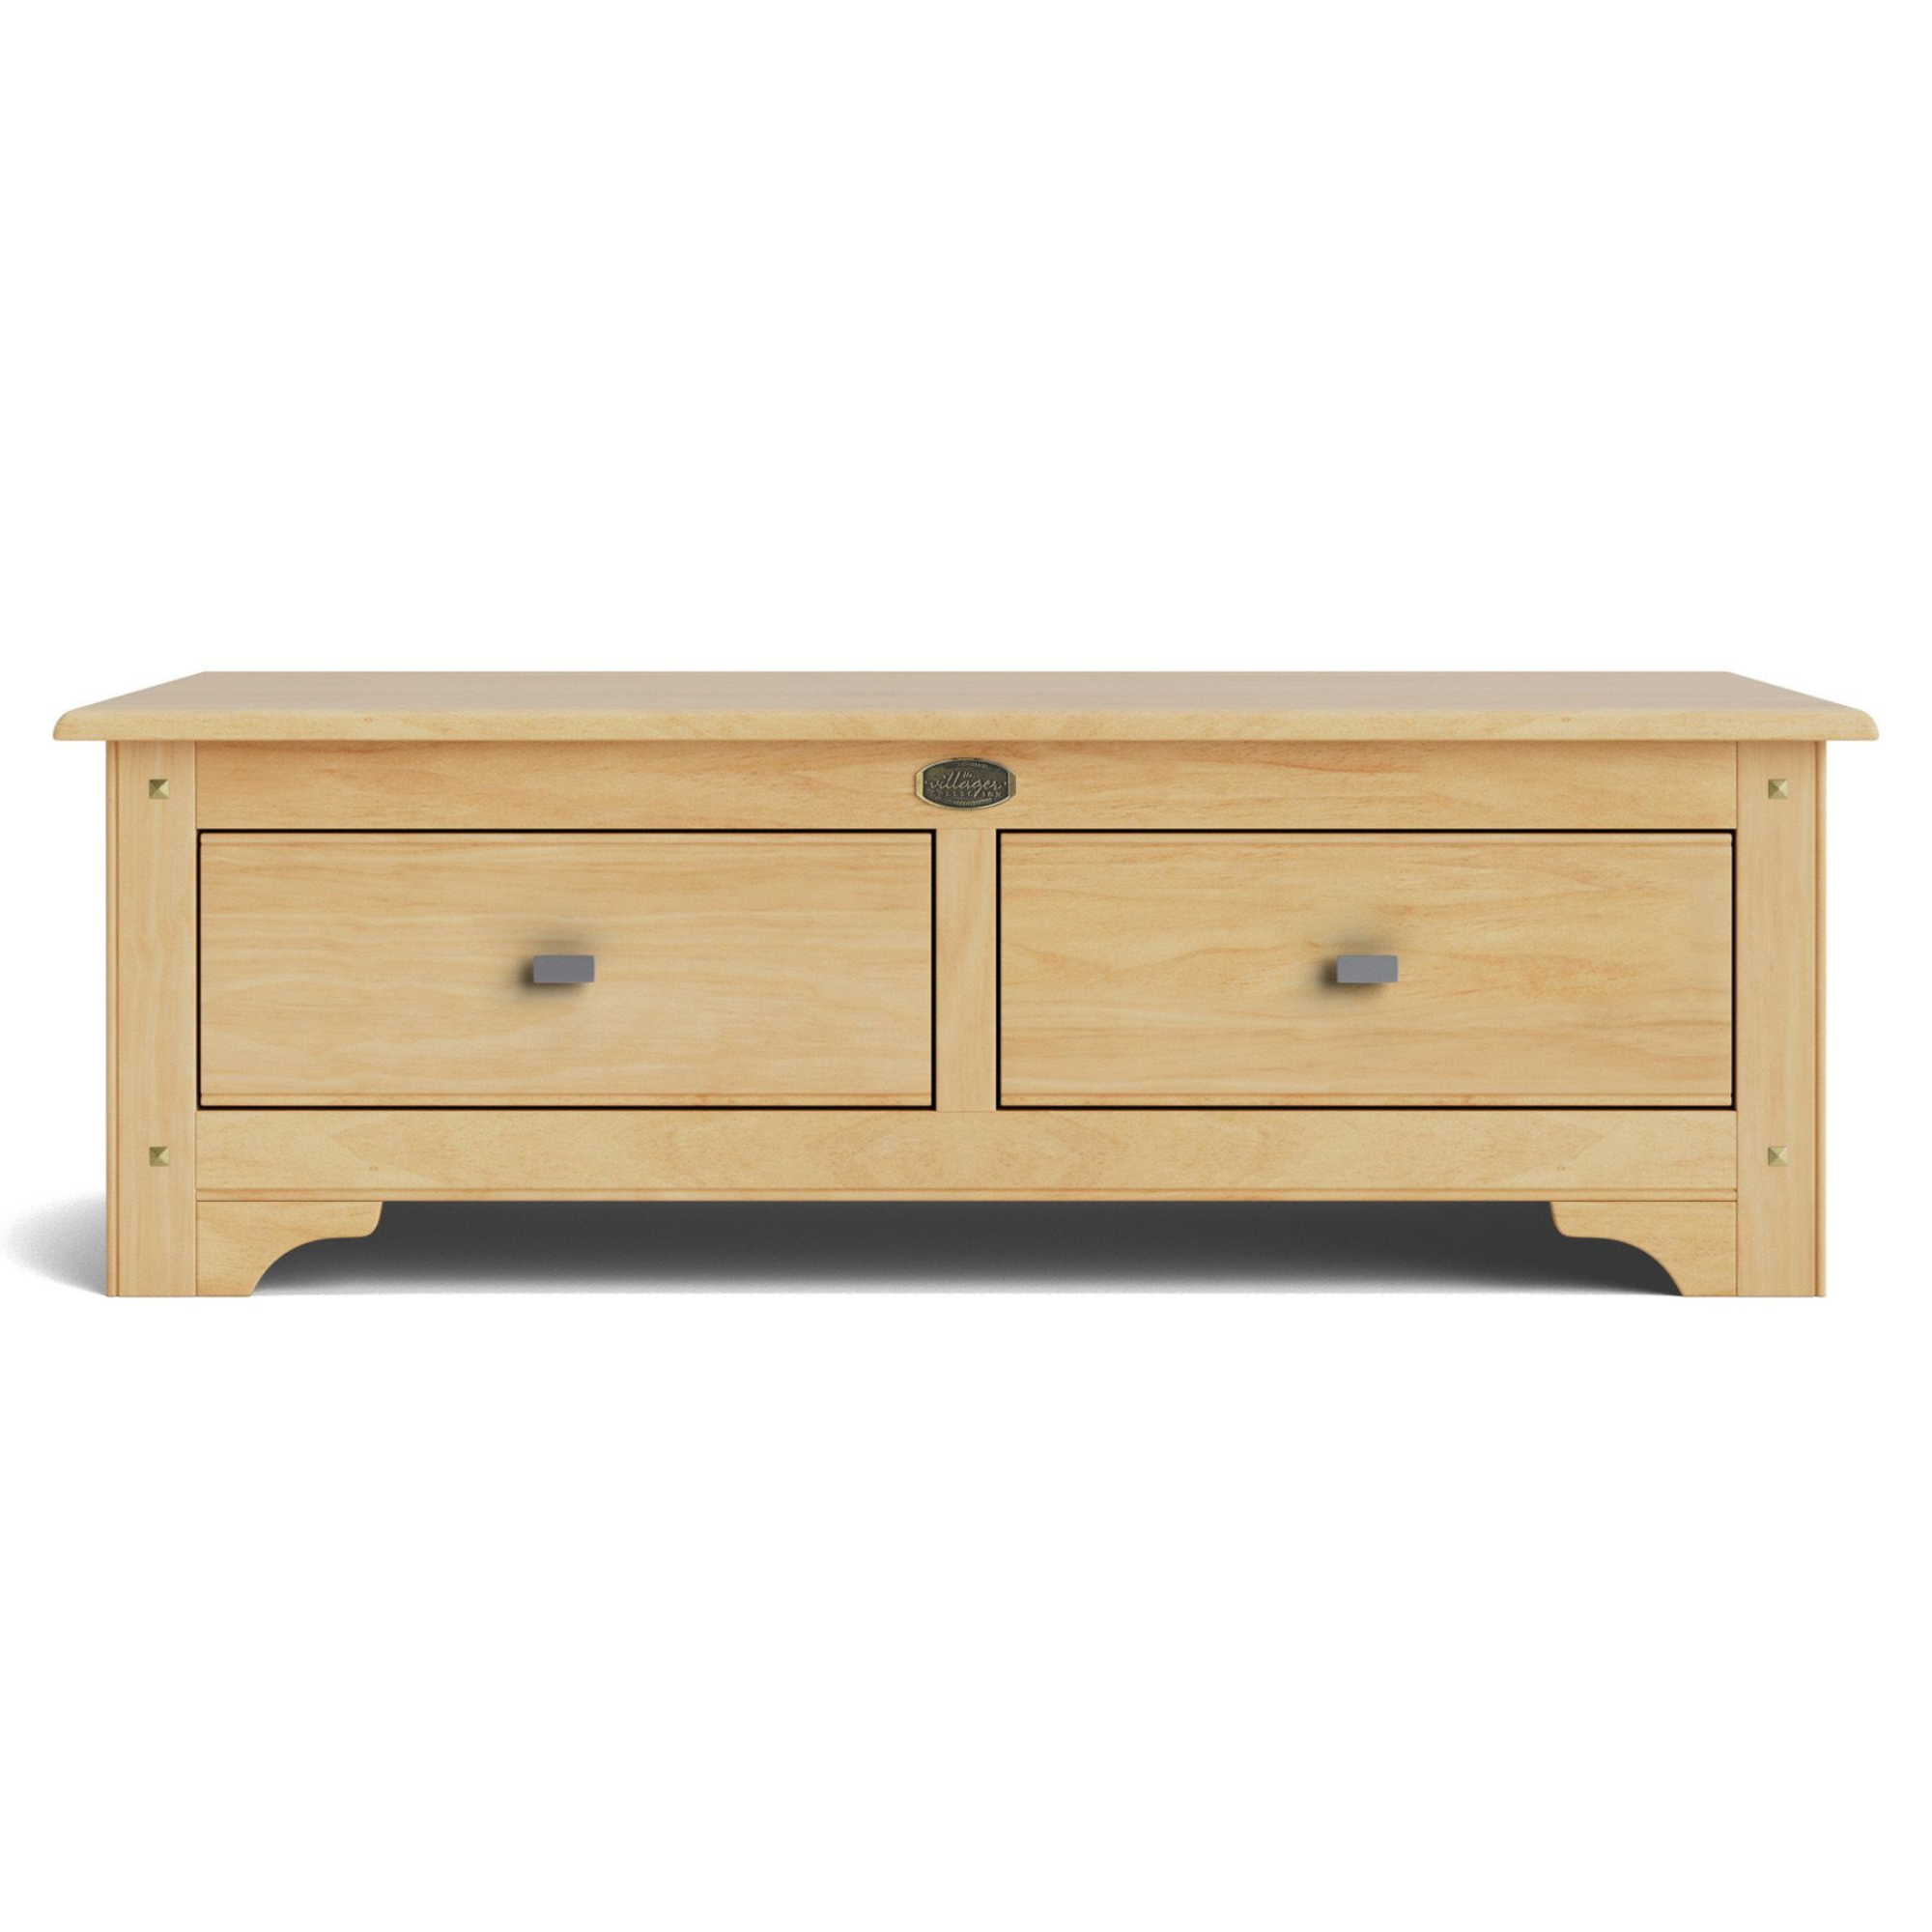 VILLAGER 2 DRAWER COFFEE TABLE | NZ MADE